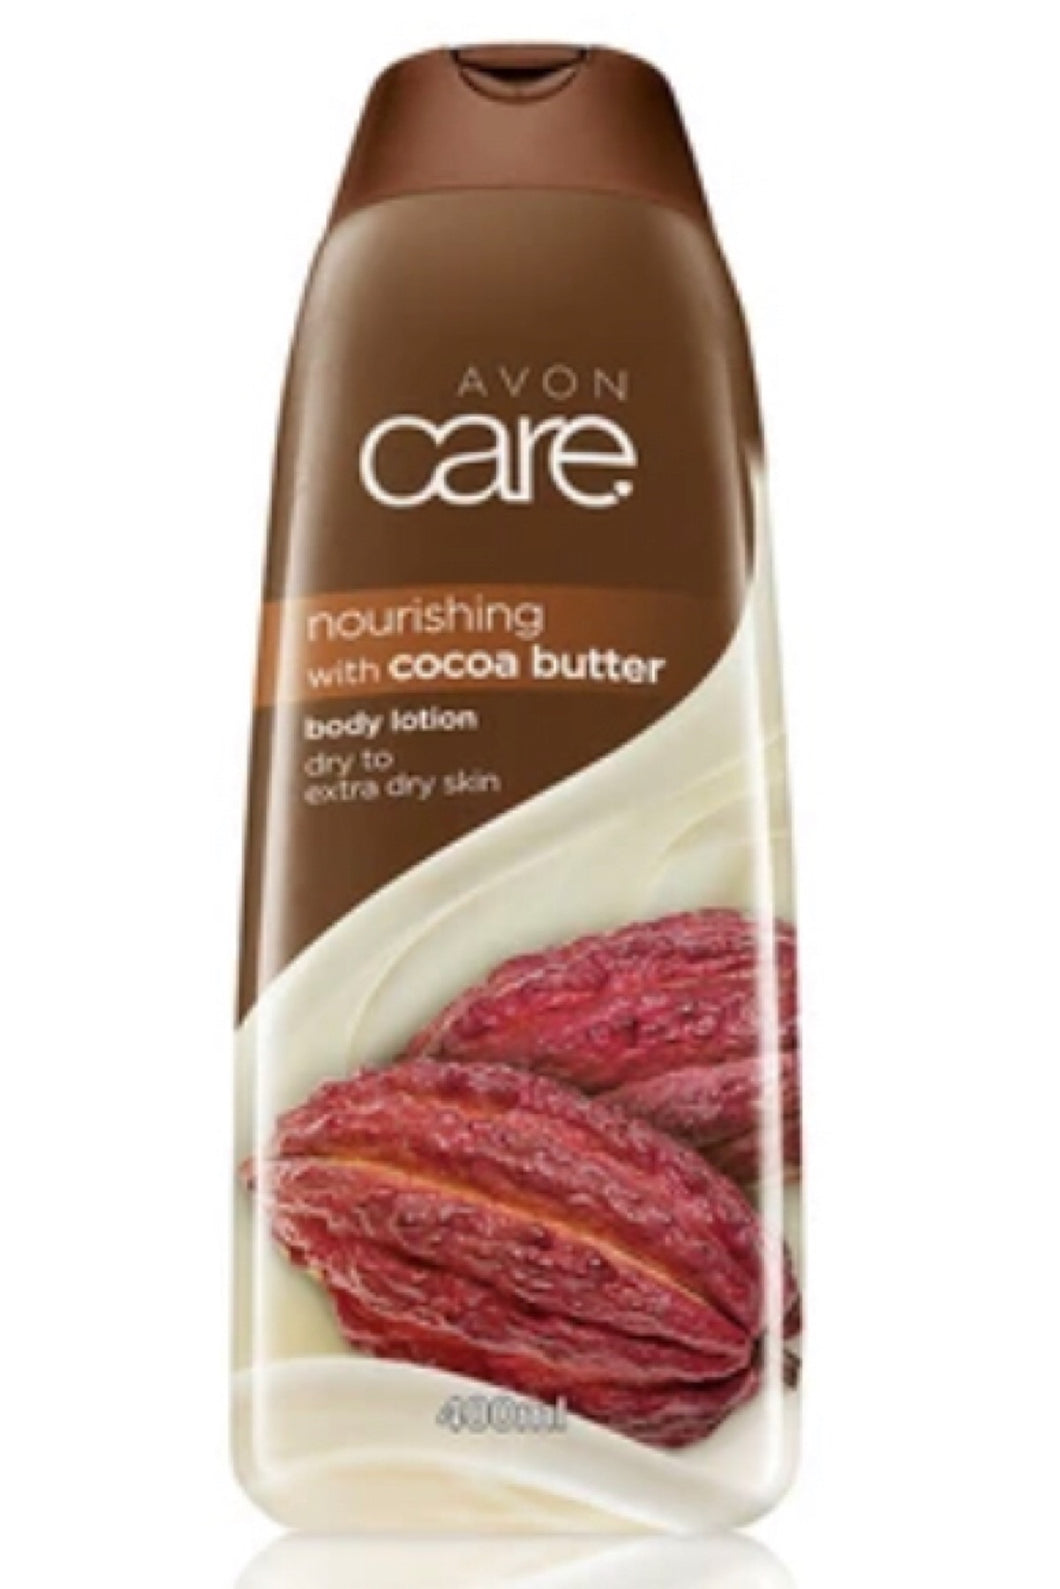 Avon Care Nourishing with Cocoa Butter  Body Lotion 400ml